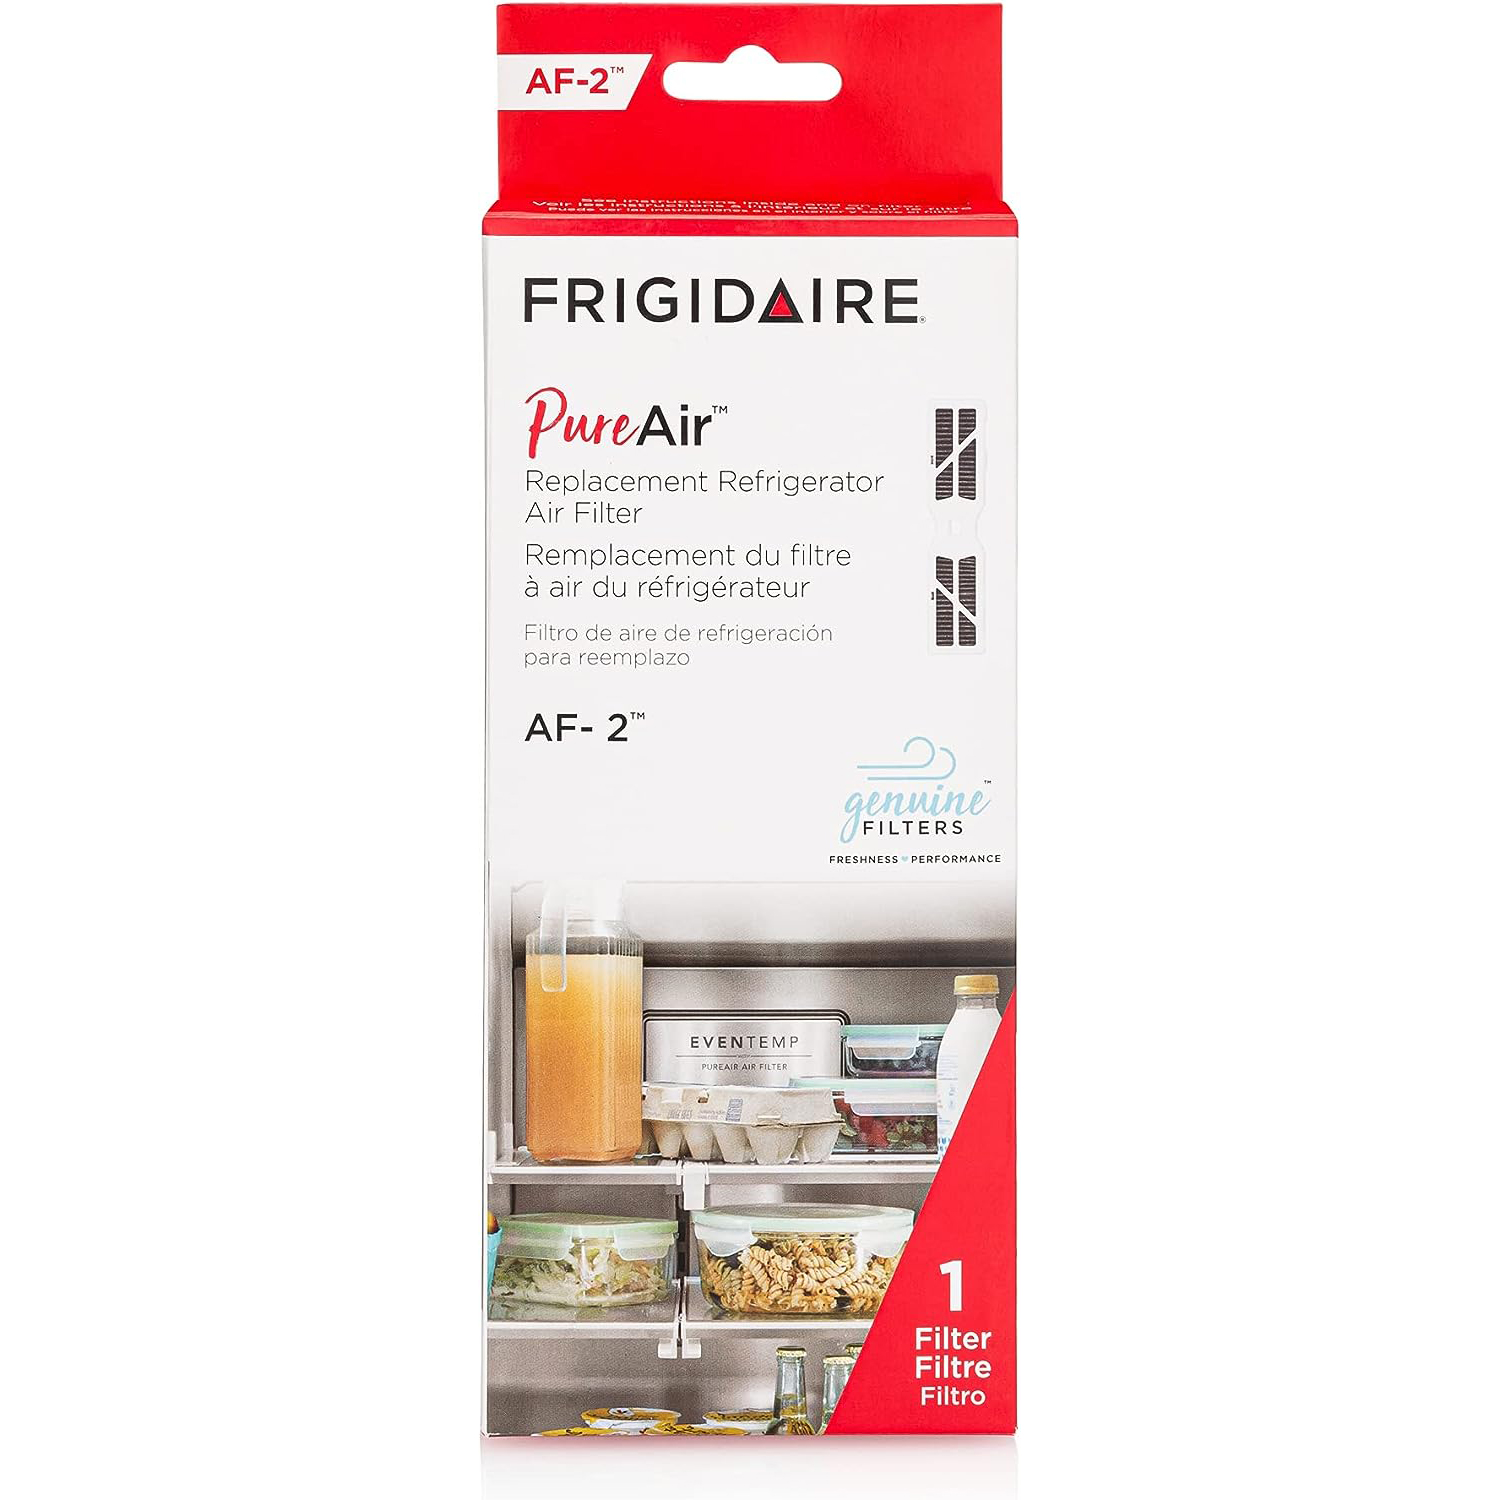 How to Change a Frigidaire Refrigerator Water and Air Filter 